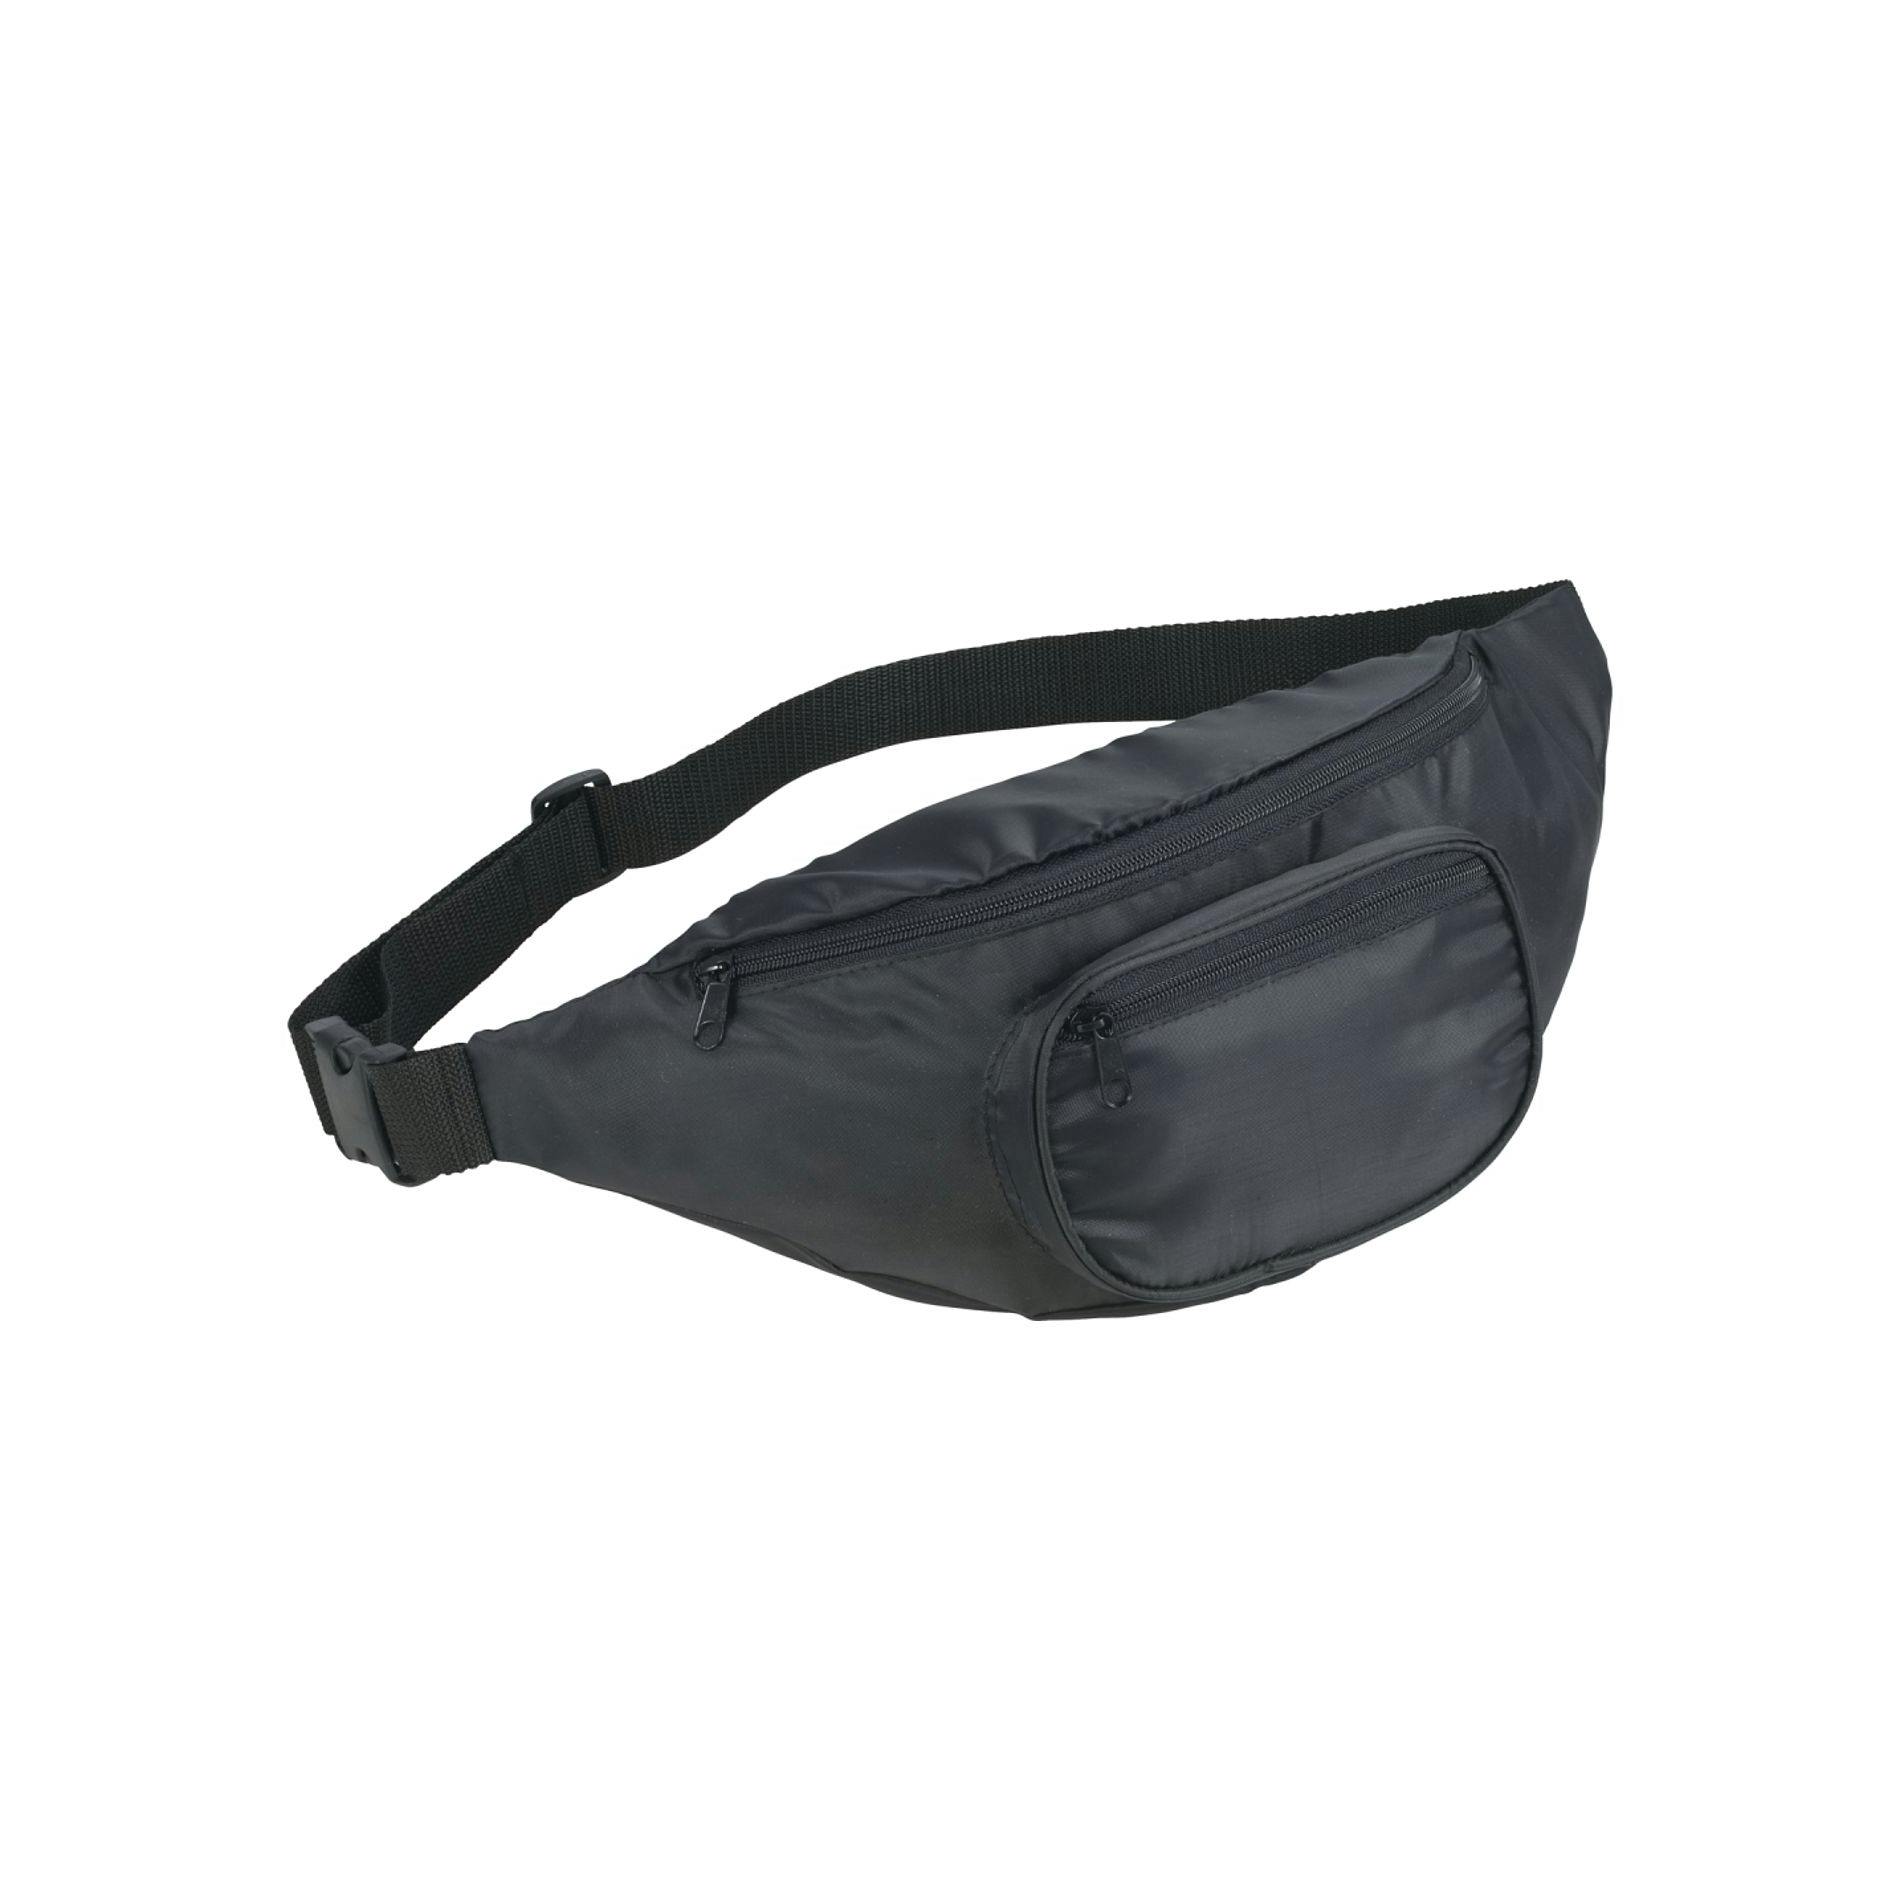 Hipster Deluxe Fanny Pack - additional Image 4